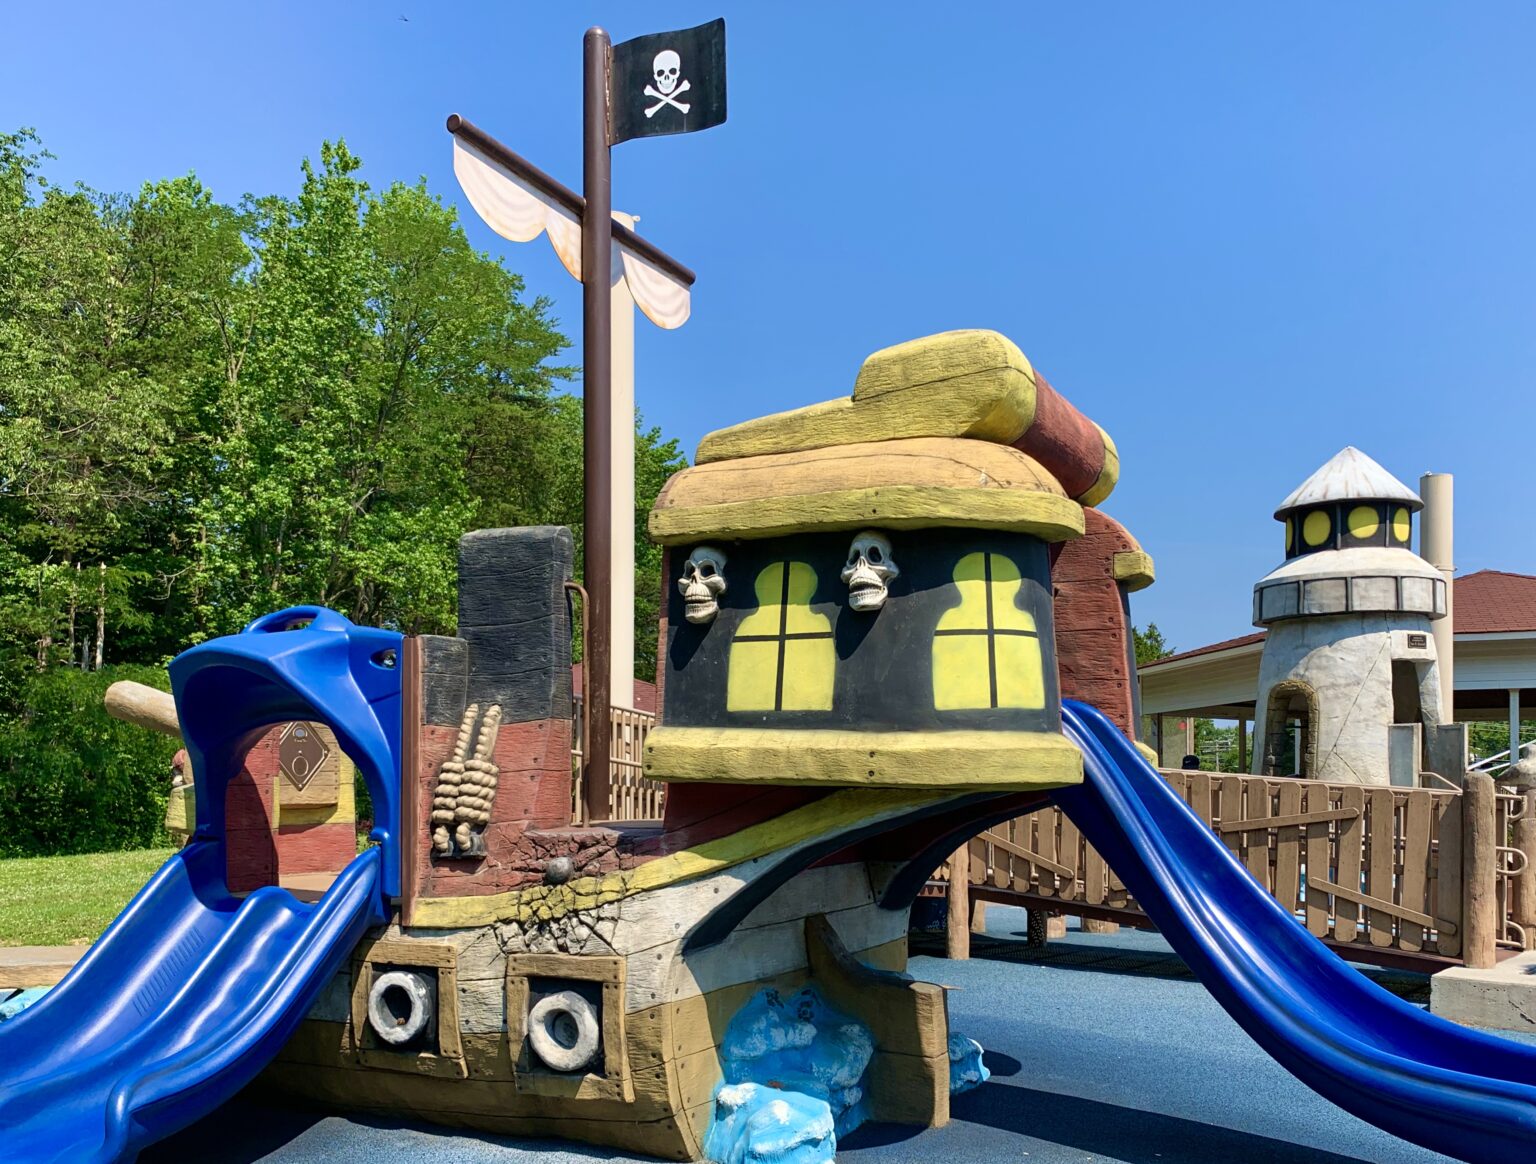 Playground Near Me - How to Find the Best Playgrounds in Your Area